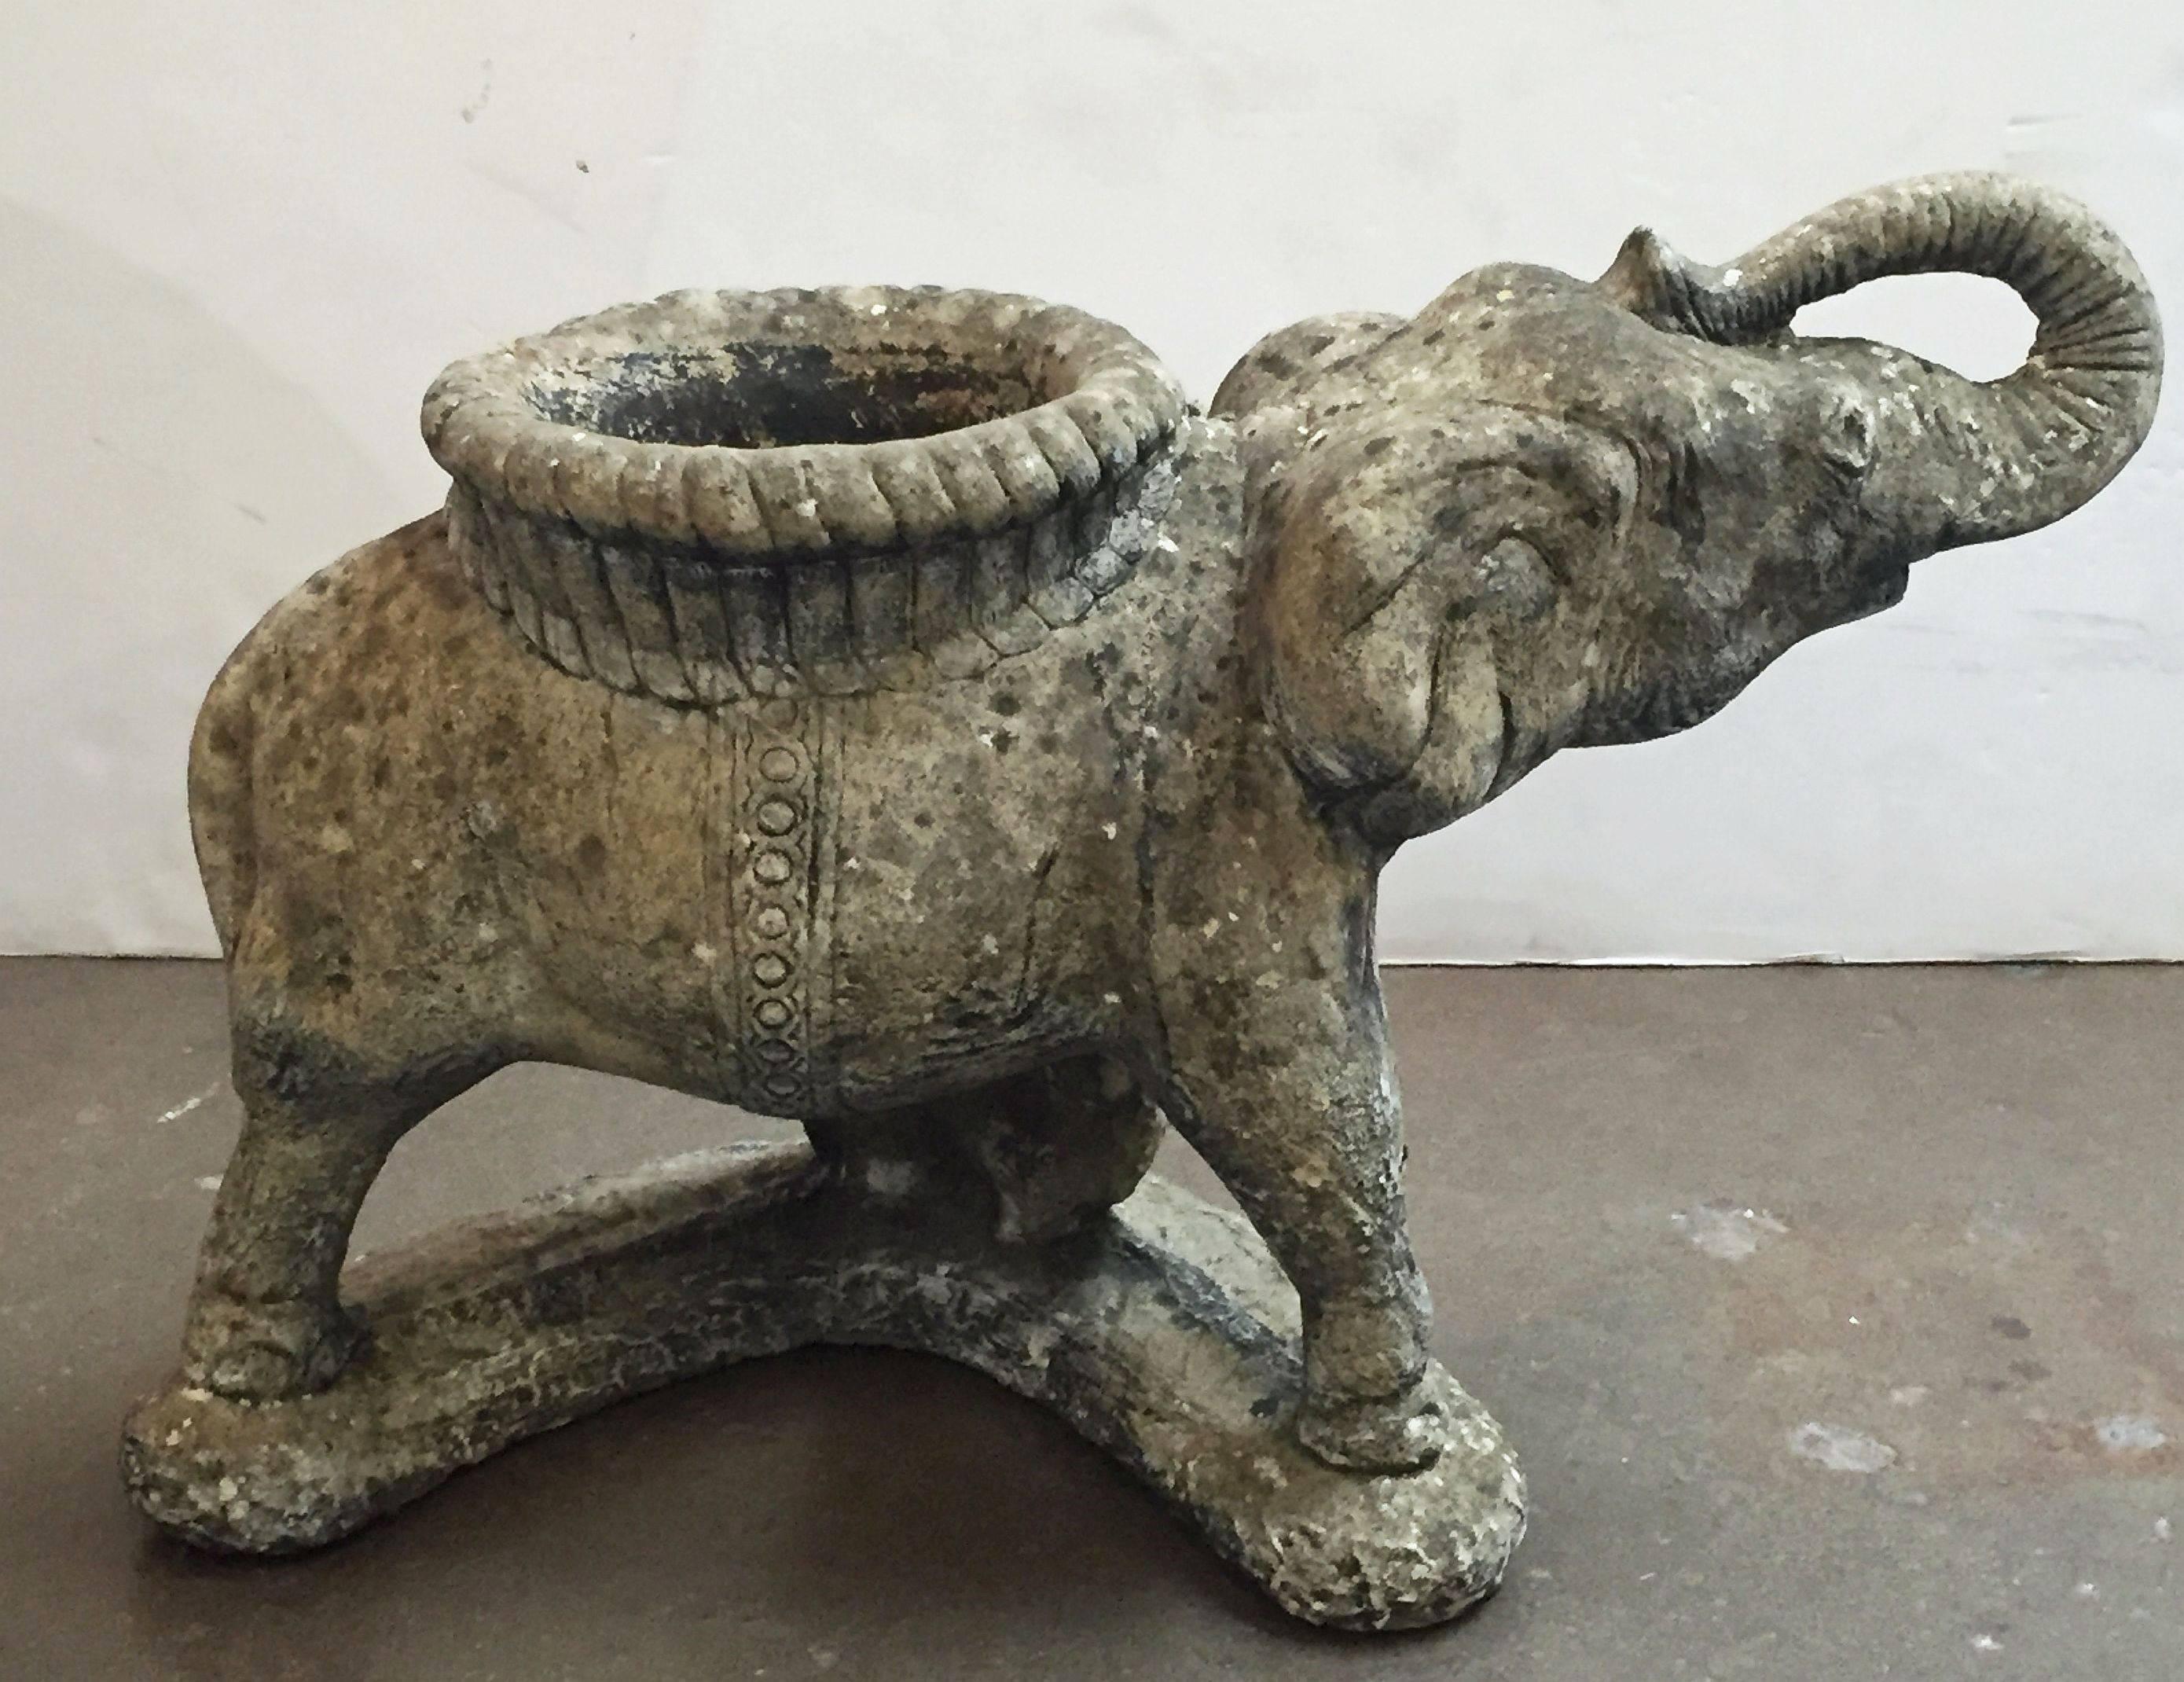 A large English garden planter, of composition stone, in the form of an elephant with raised trunk and howdah (seat) serving as planter.